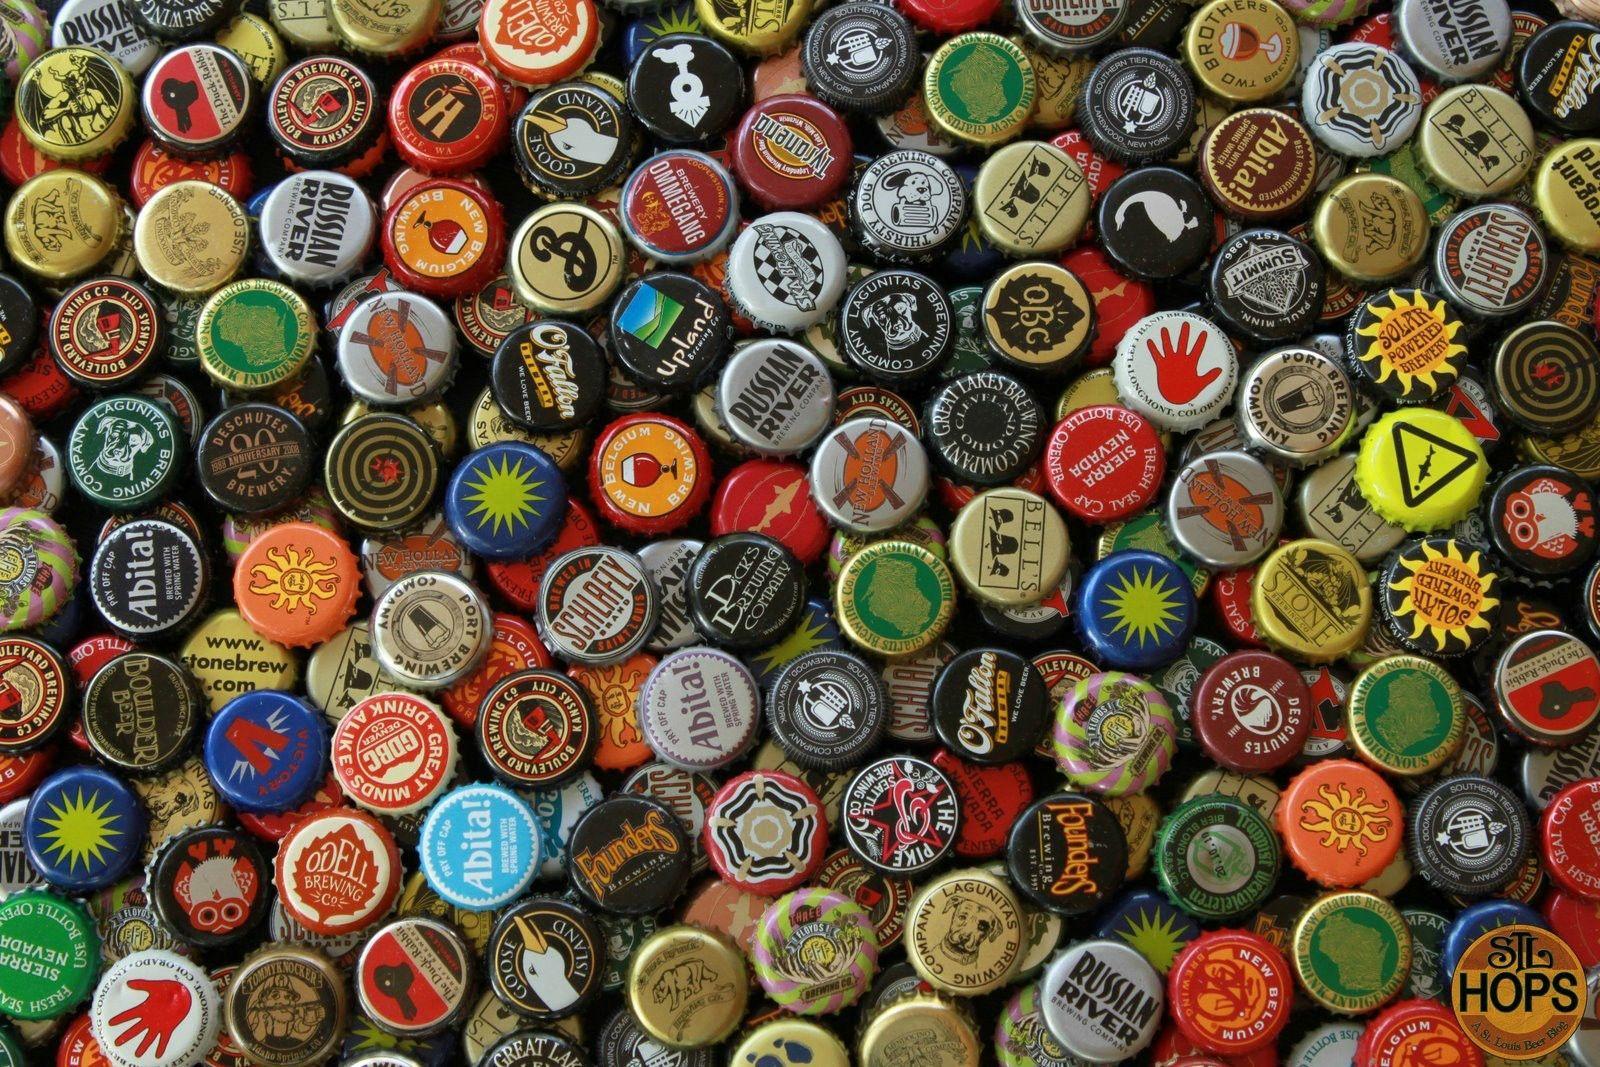 Just because I can't have a pint at work., beerporn. Beer wallpaper, Beer bottle caps, Bottle cap